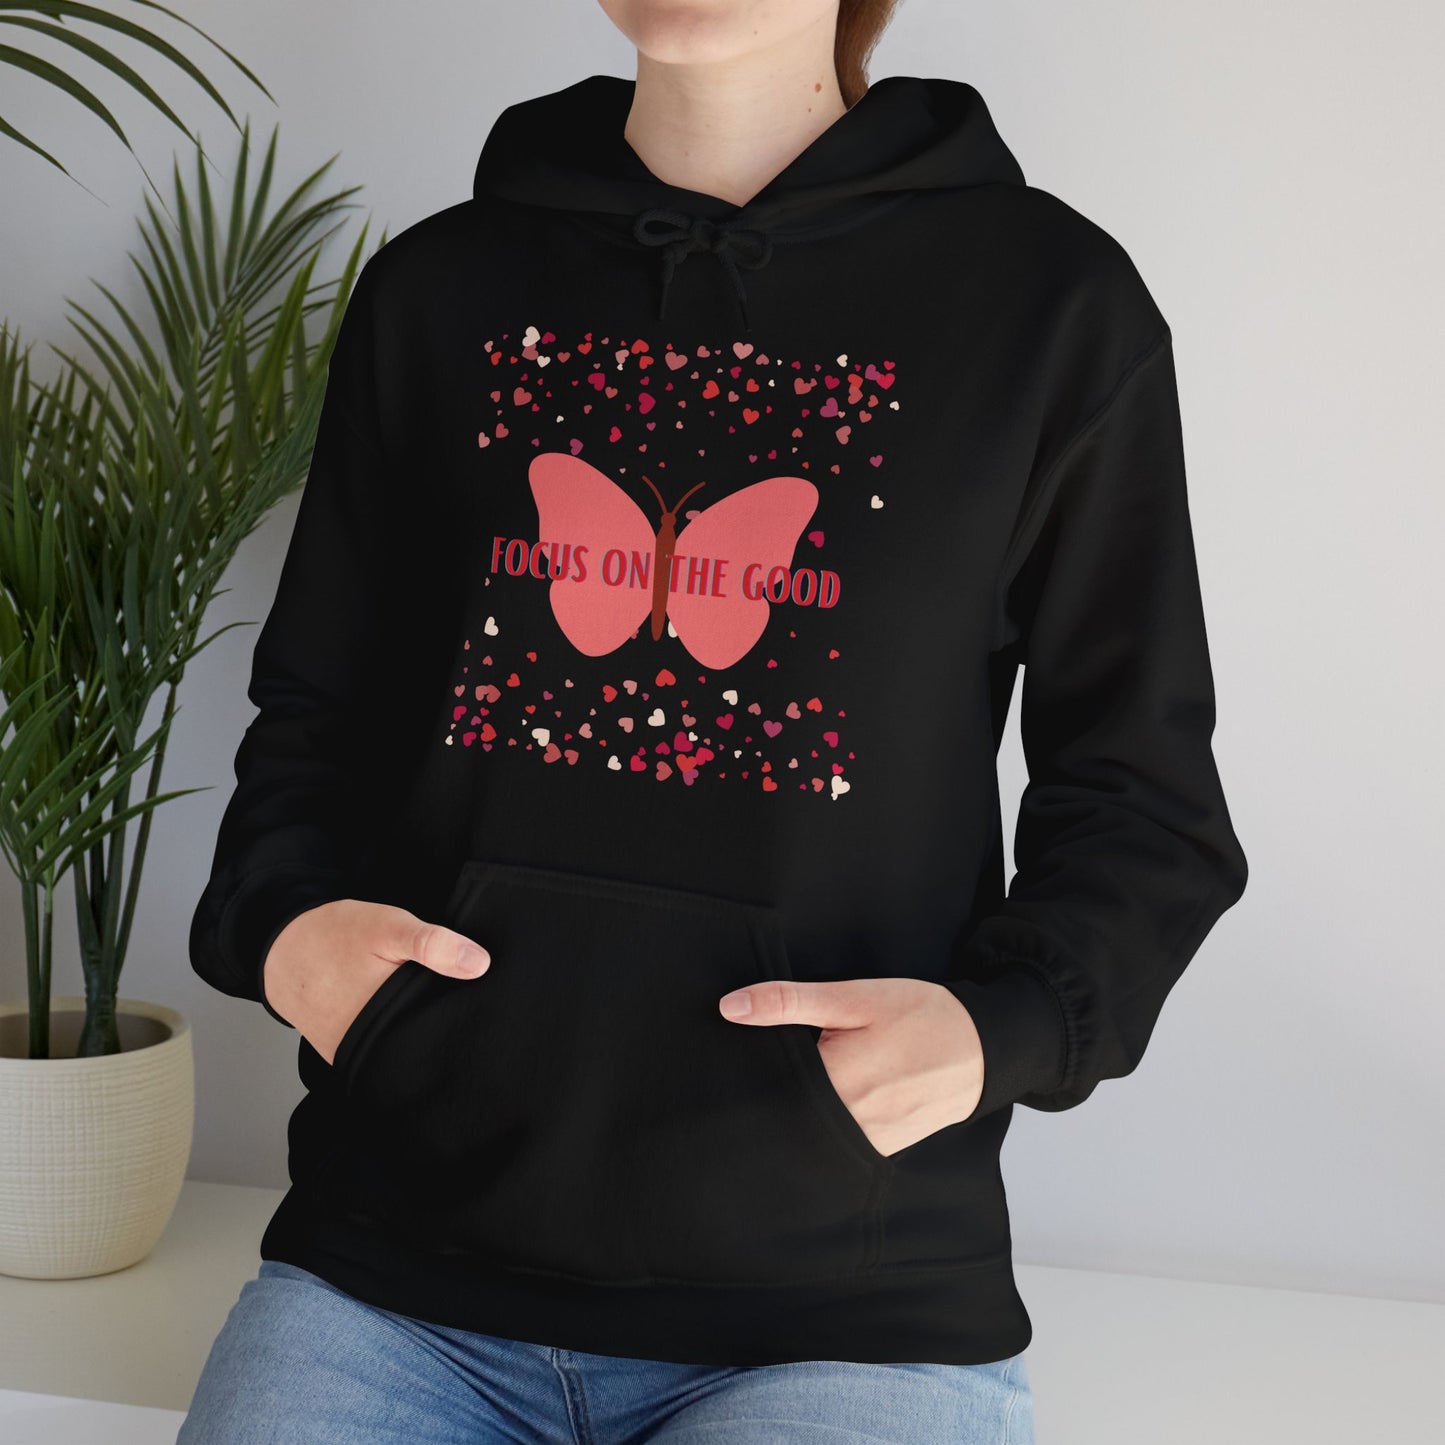 Focus on the good message on this butterfly and heart filled designed Unisex Heavy Blend™ Hooded Sweatshirt